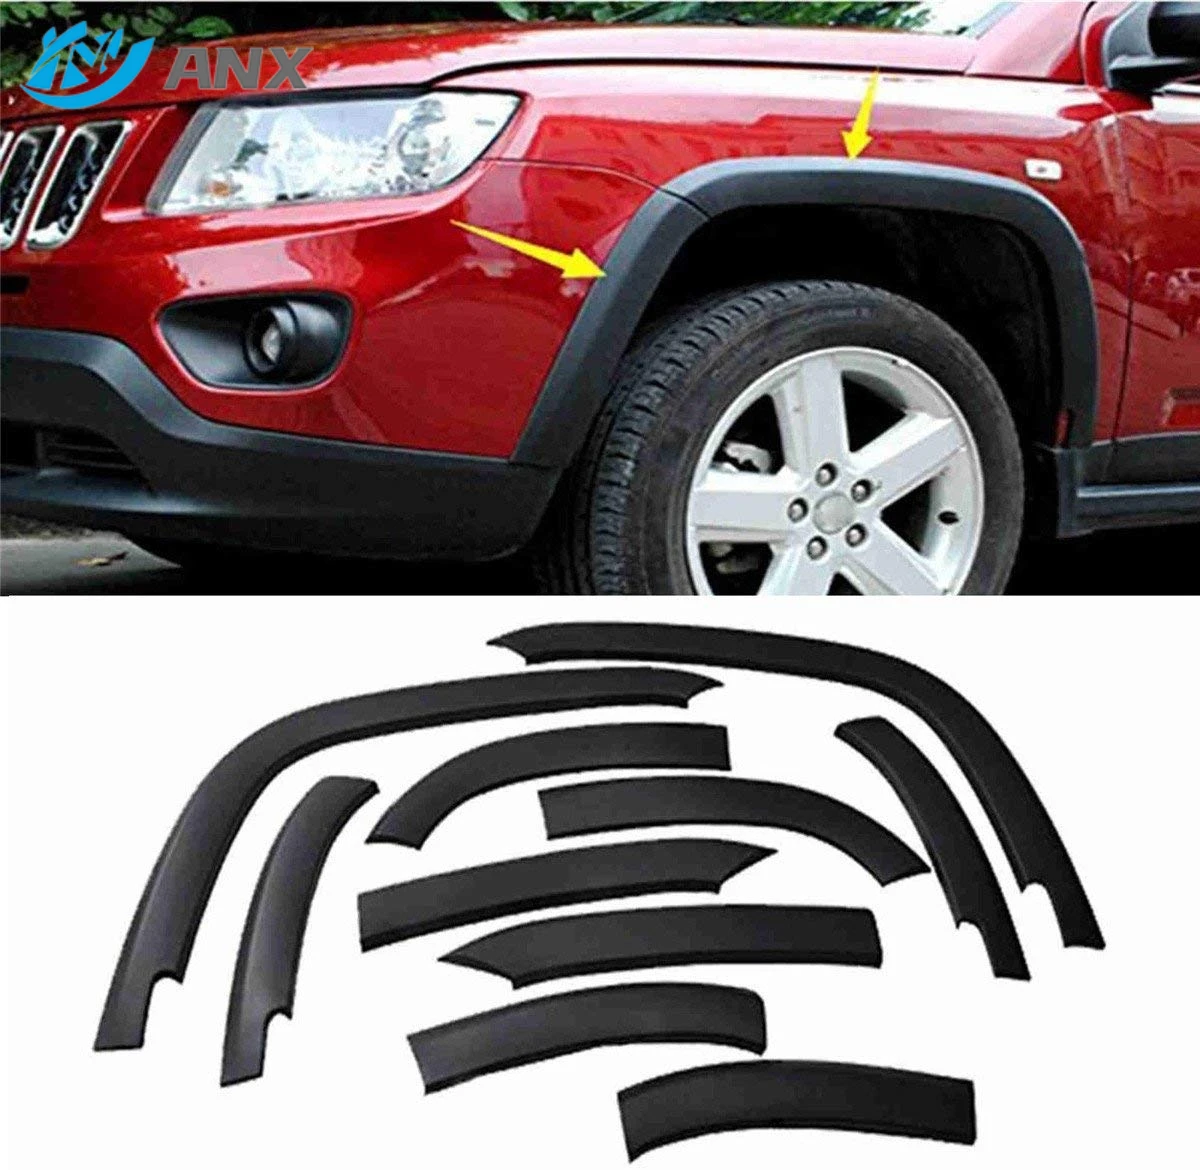 Enlarge 10Pcs/Set Front & Rear Wheels Fender Flares Cover Fit For Jeep Compass 2011-2018